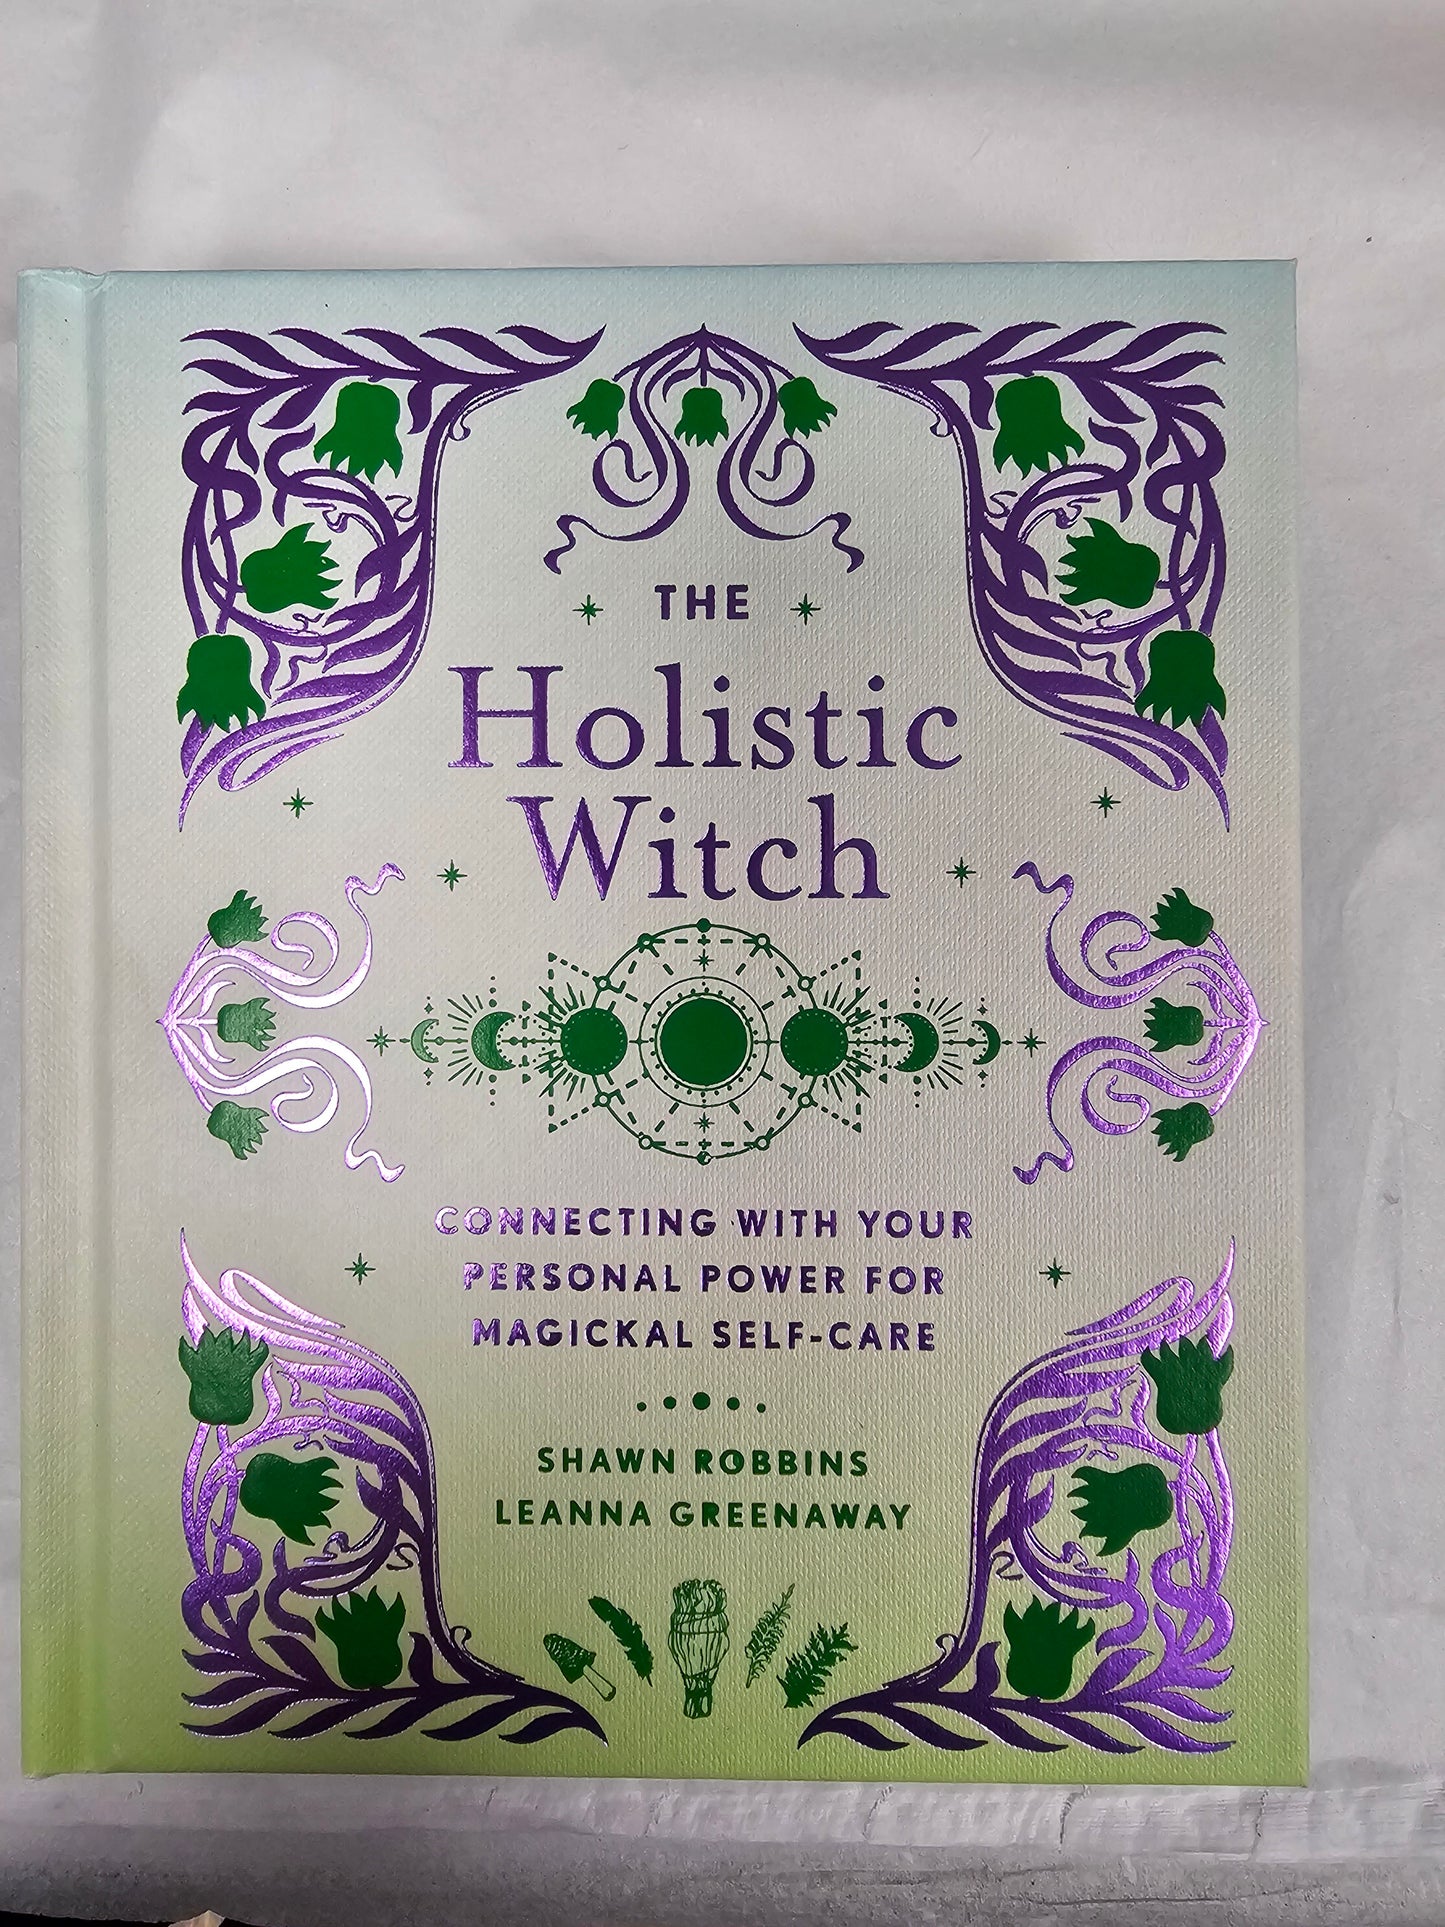 The Holistic Witch book